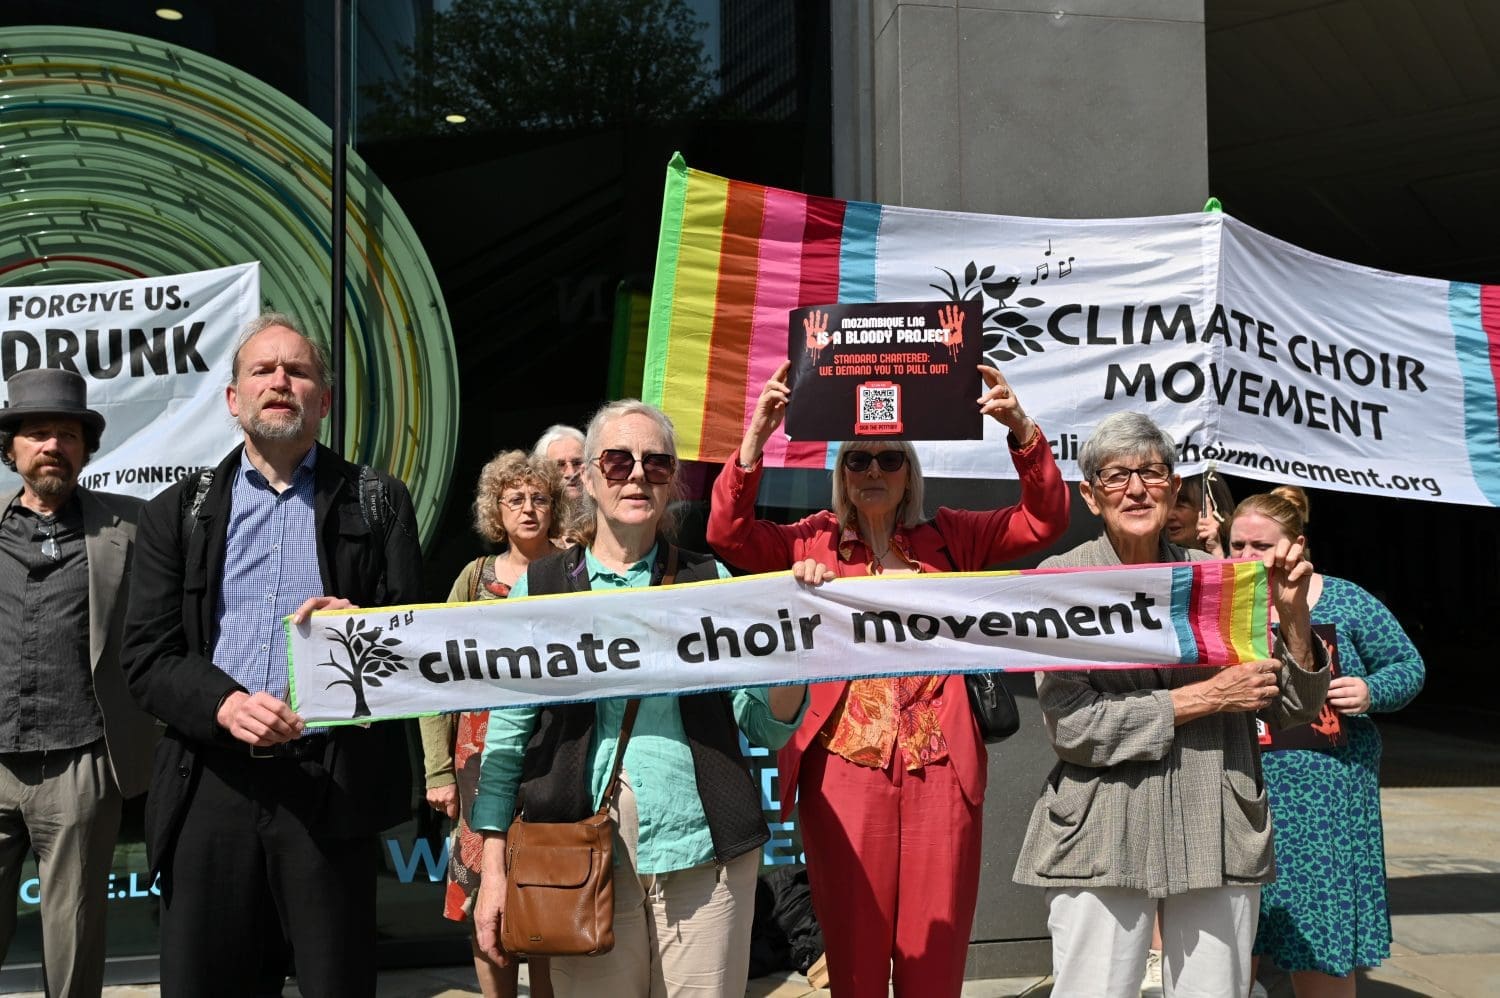 Protesters with Climate Choir Movement banners.